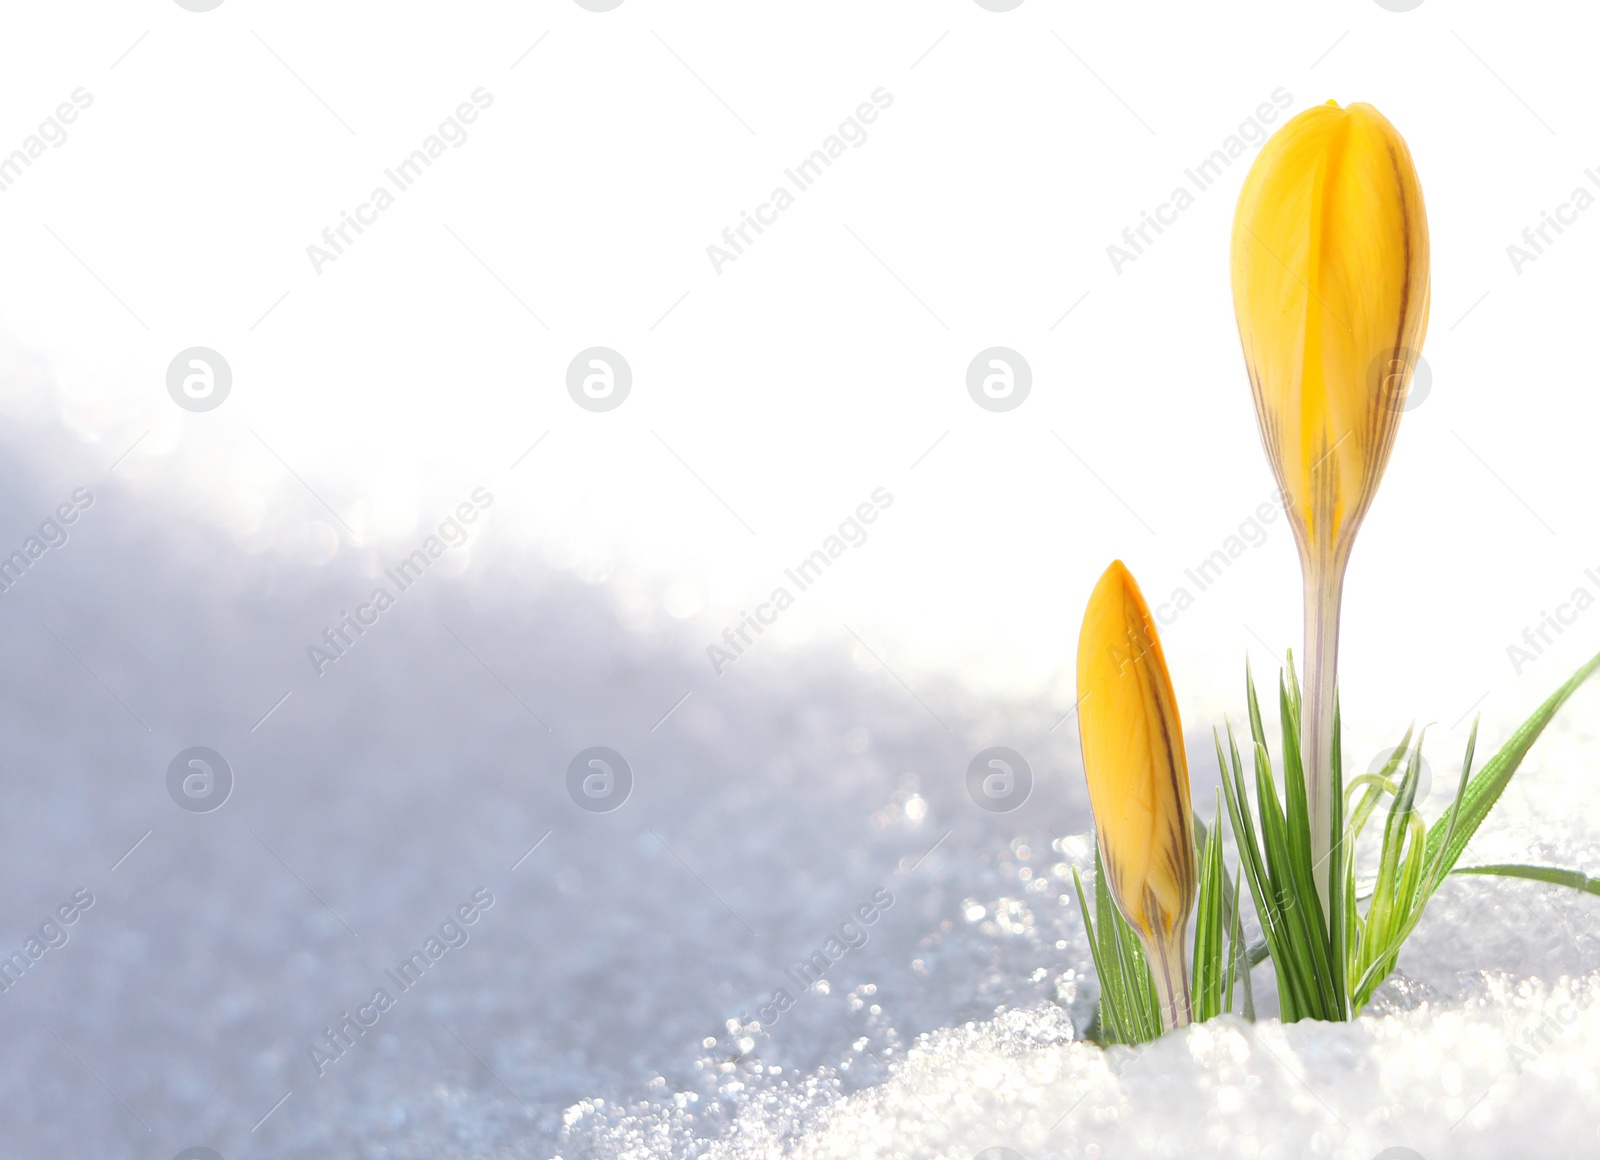 Image of Beautiful spring crocus flowers growing through snow outdoors, space for text